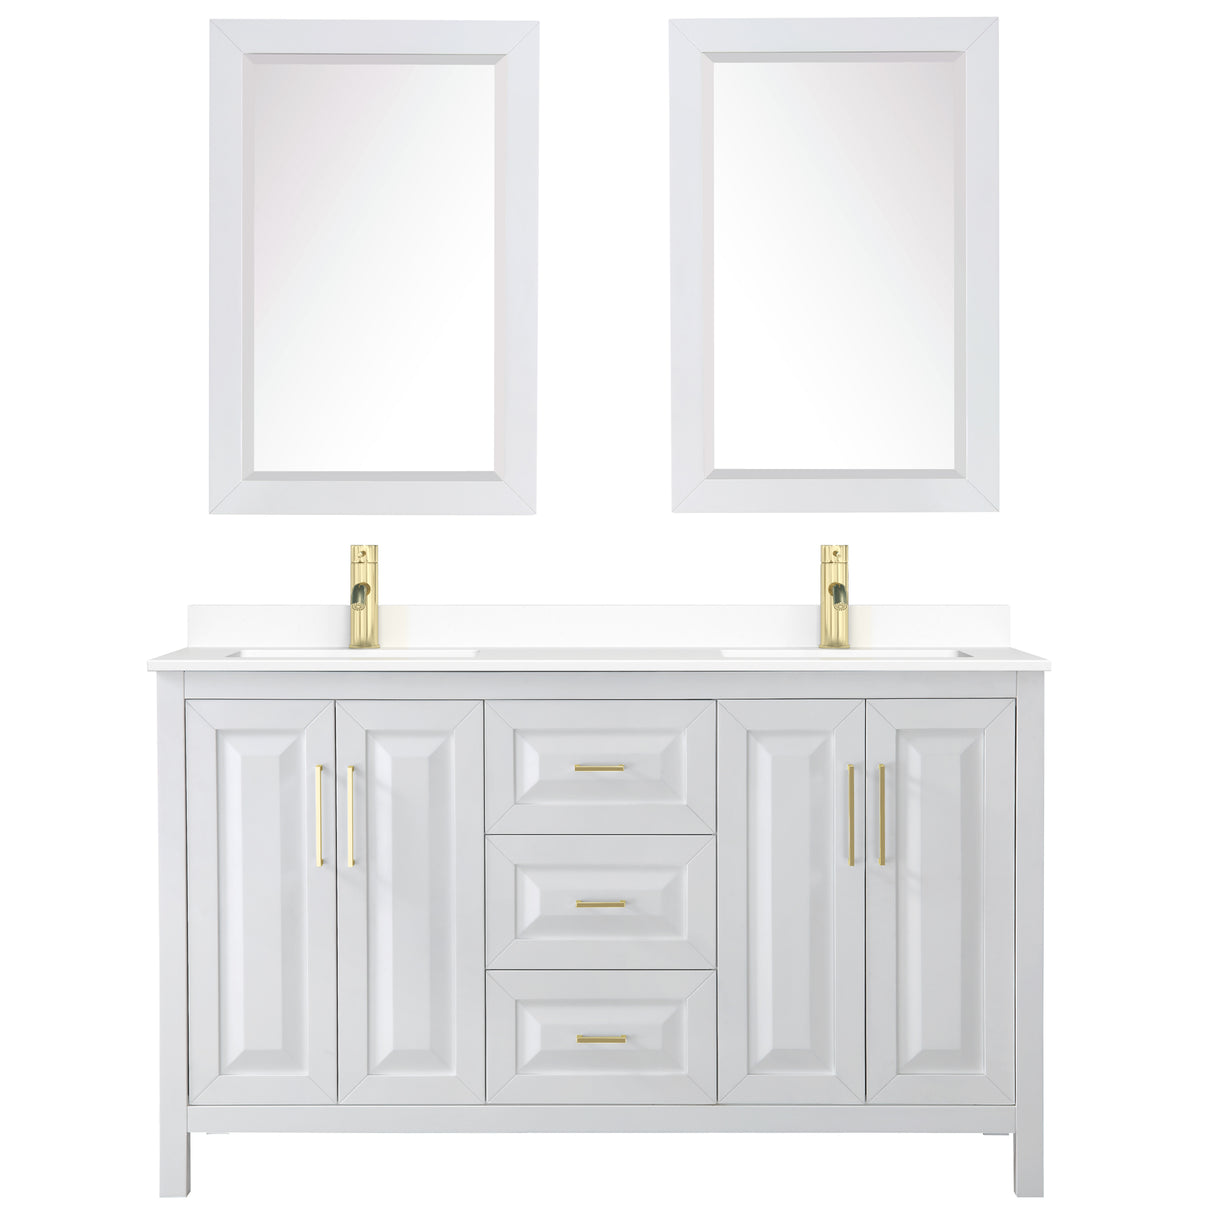 Daria 60 Inch Double Bathroom Vanity in White White Cultured Marble Countertop Undermount Square Sinks 24 Inch Mirrors Brushed Gold Trim